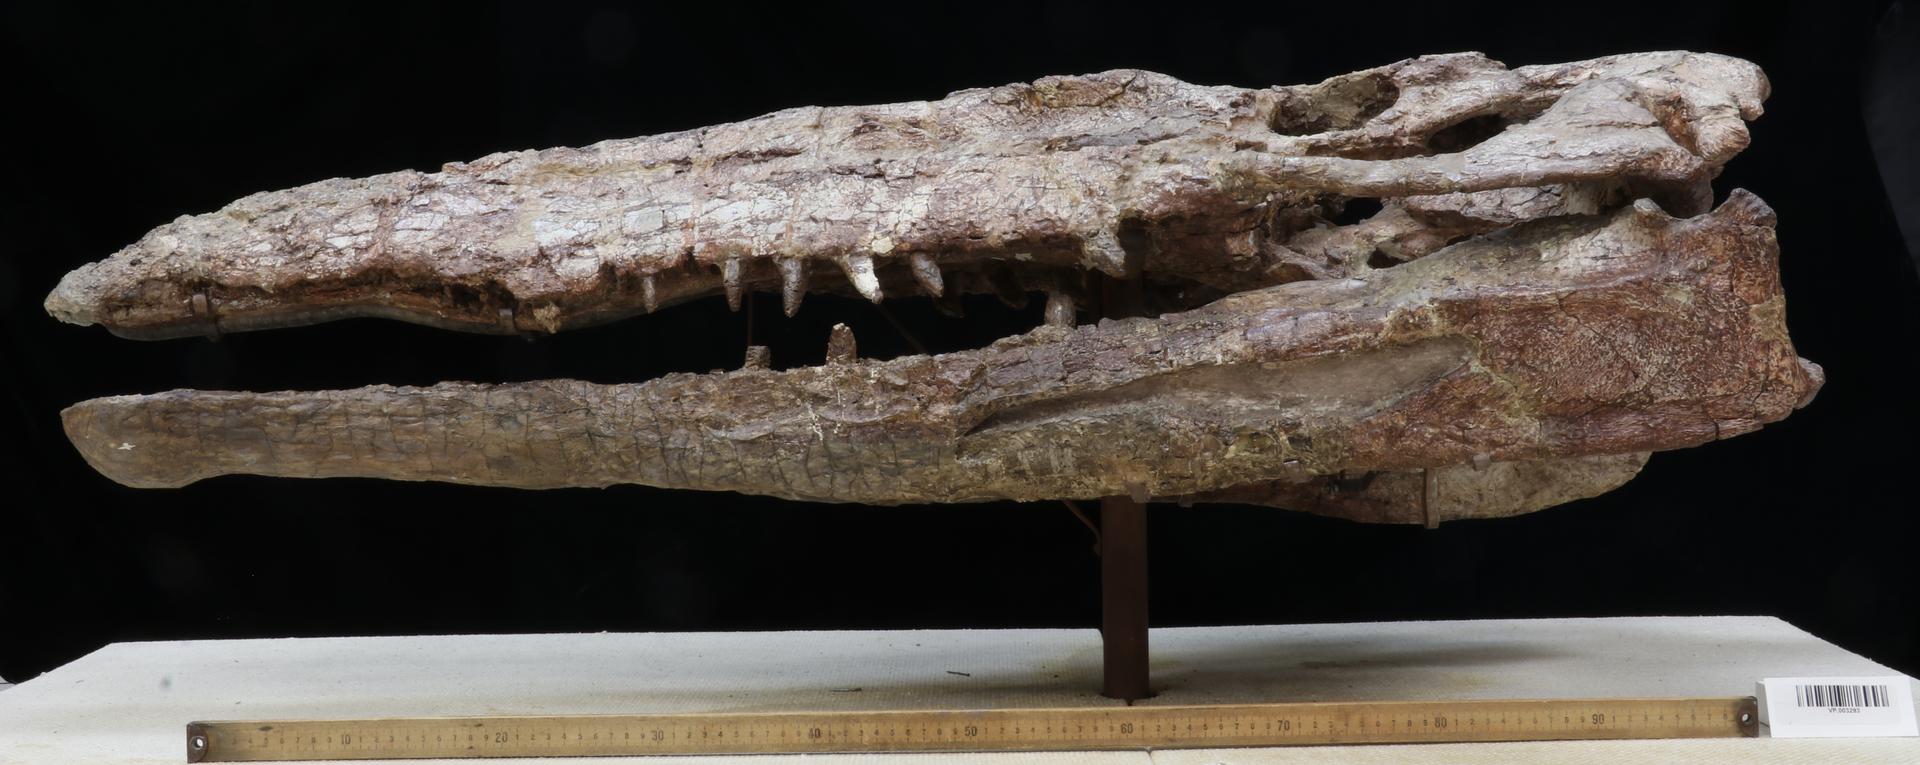 Photograph of the mounted skull of a phytosaur from the Triassic of east-central New Mexico. The skull is shown from the side. It is flattened and elongated with pointed teeth. The eyes were near the top of the head.